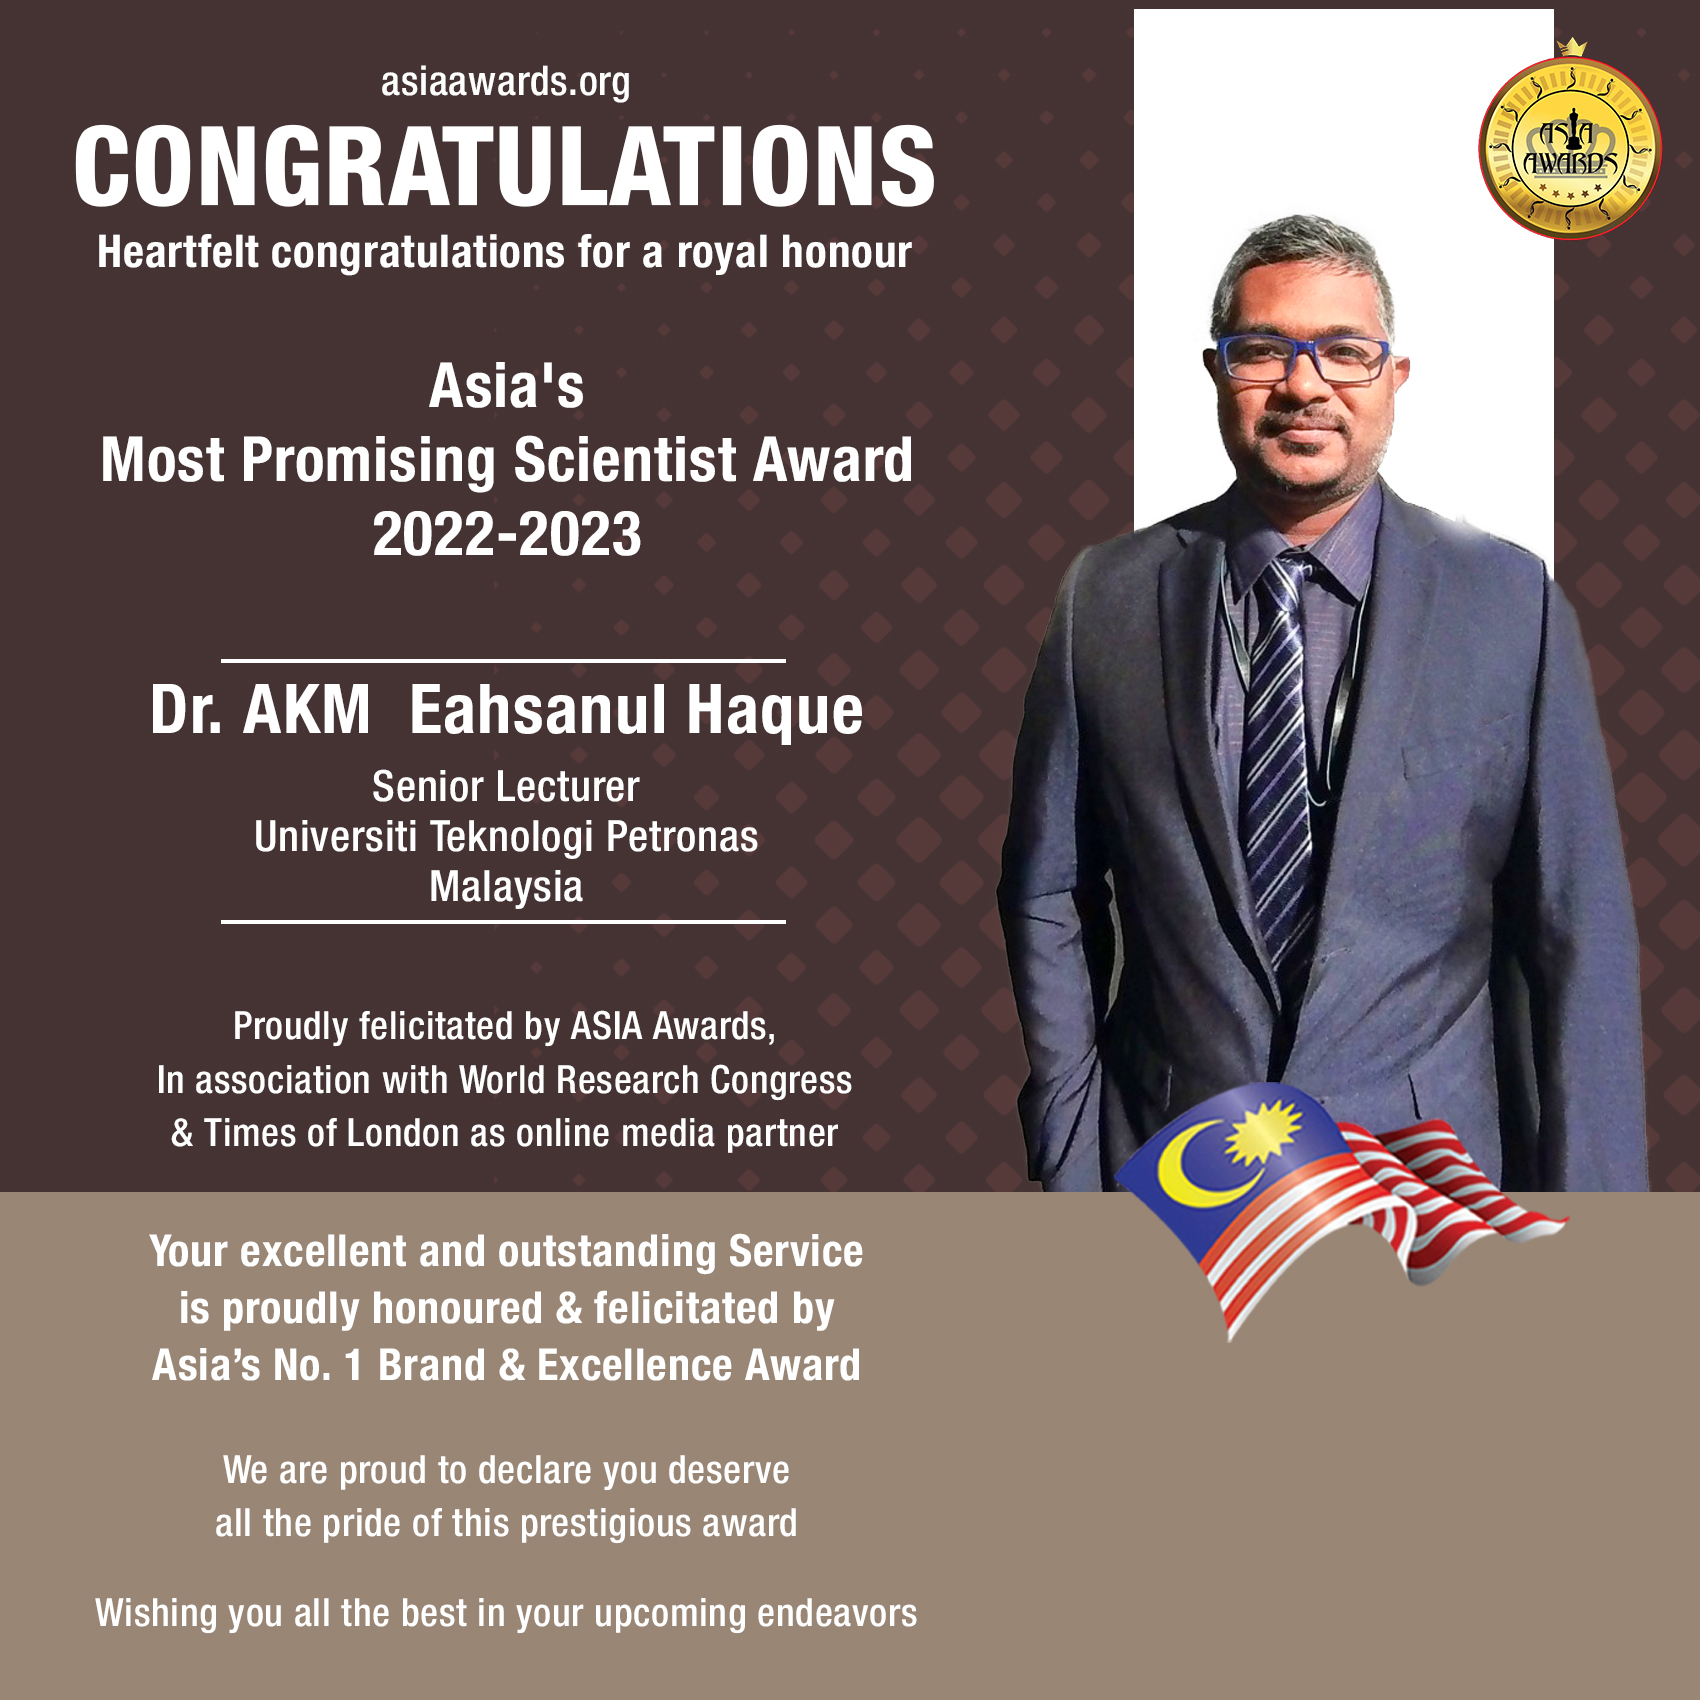 Dr. AKM  Eahsanul Haque Has bagged Asia's Most Promising Scientist Award